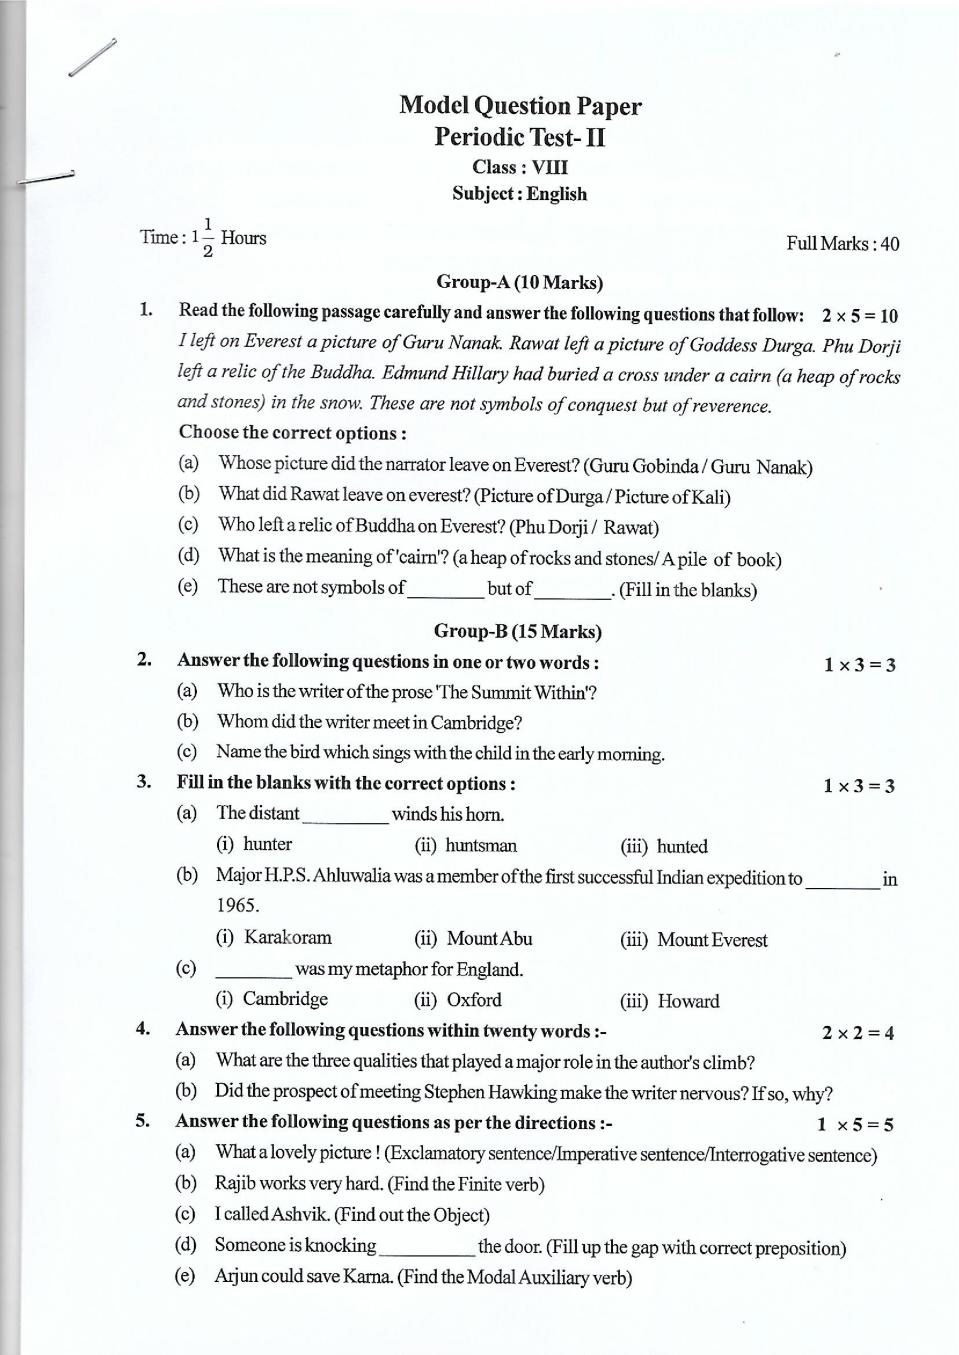 Tripura Board Model Question Paper for Class 8 Annual Exam - Page 1